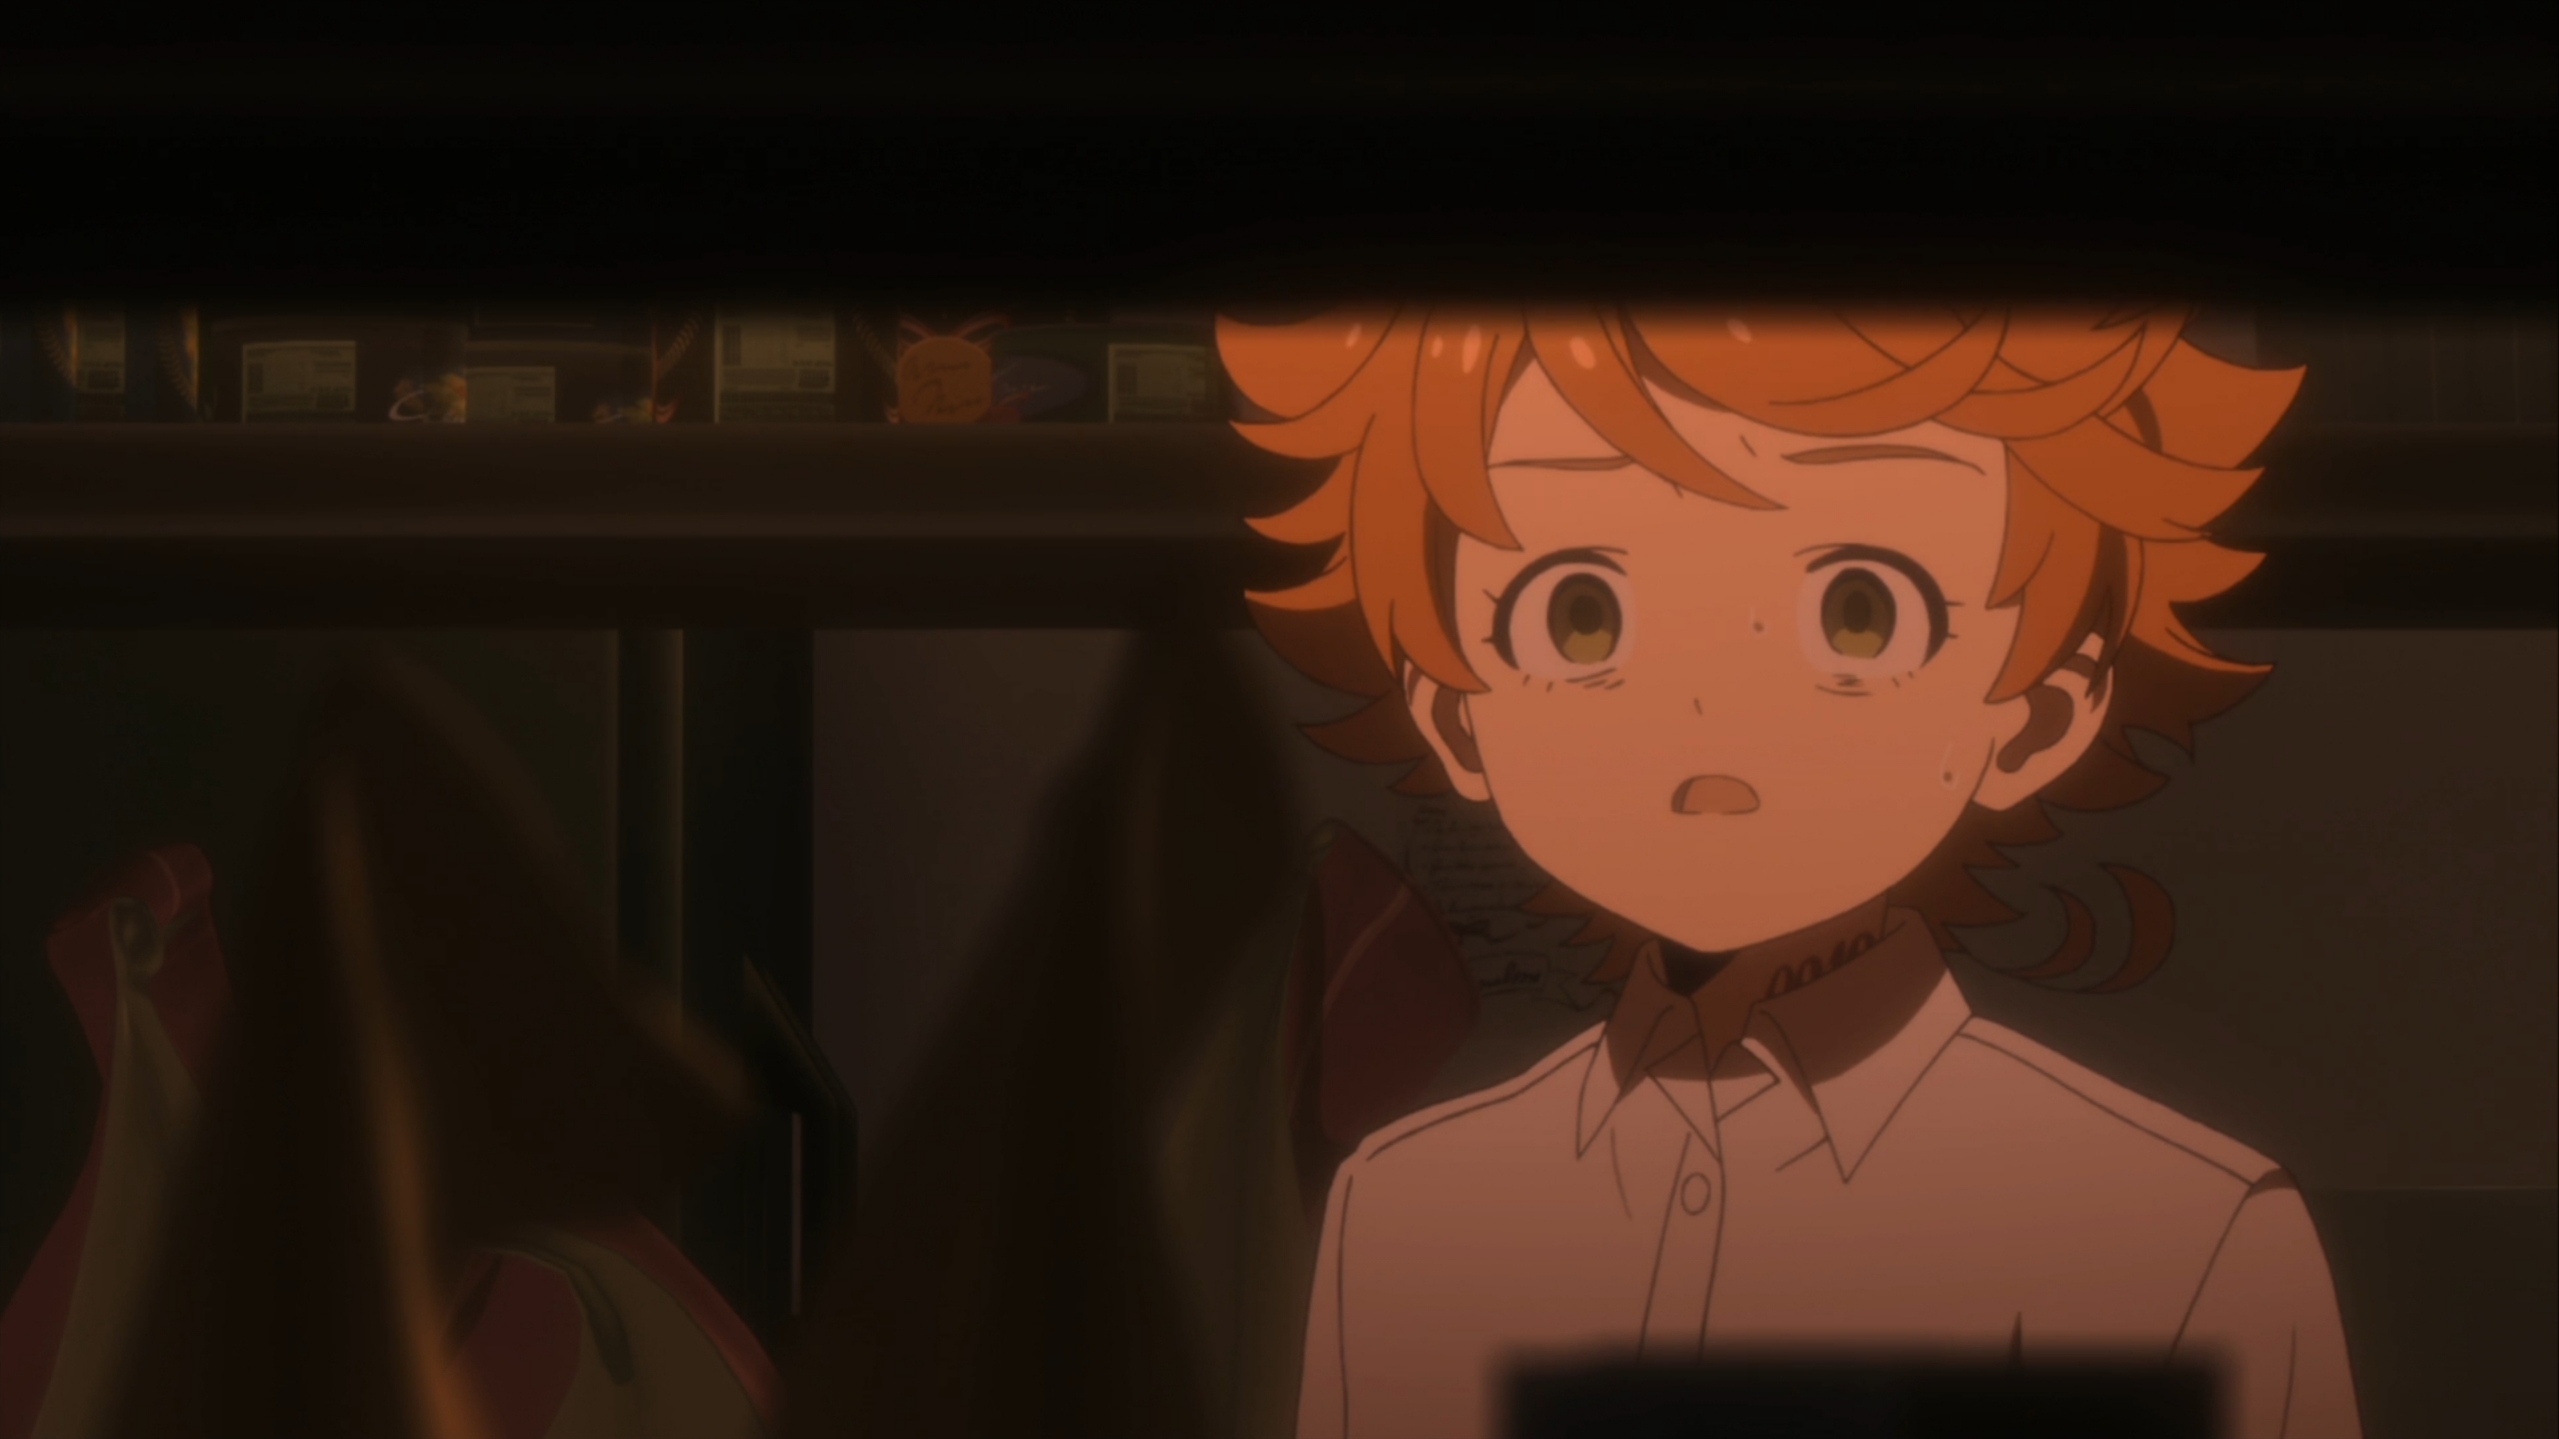 Promised Neverland Episode 3 Review - Season 2